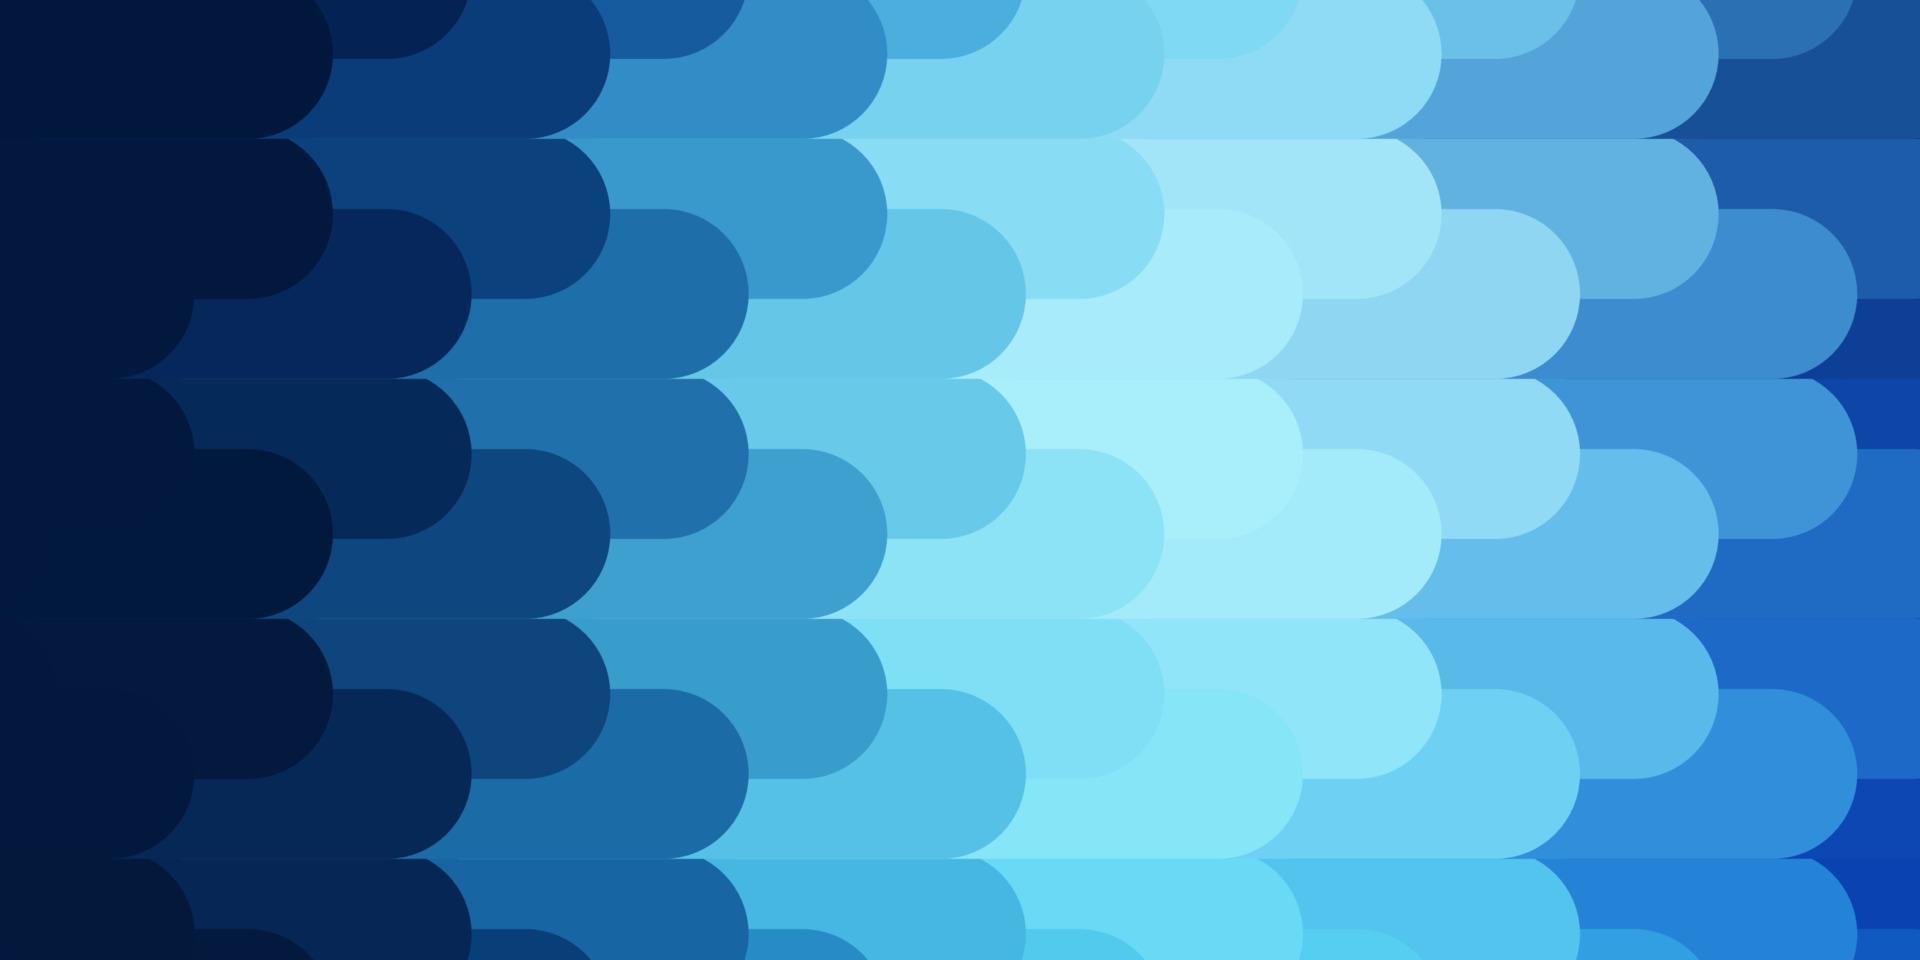 Light BLUE vector background with lines.